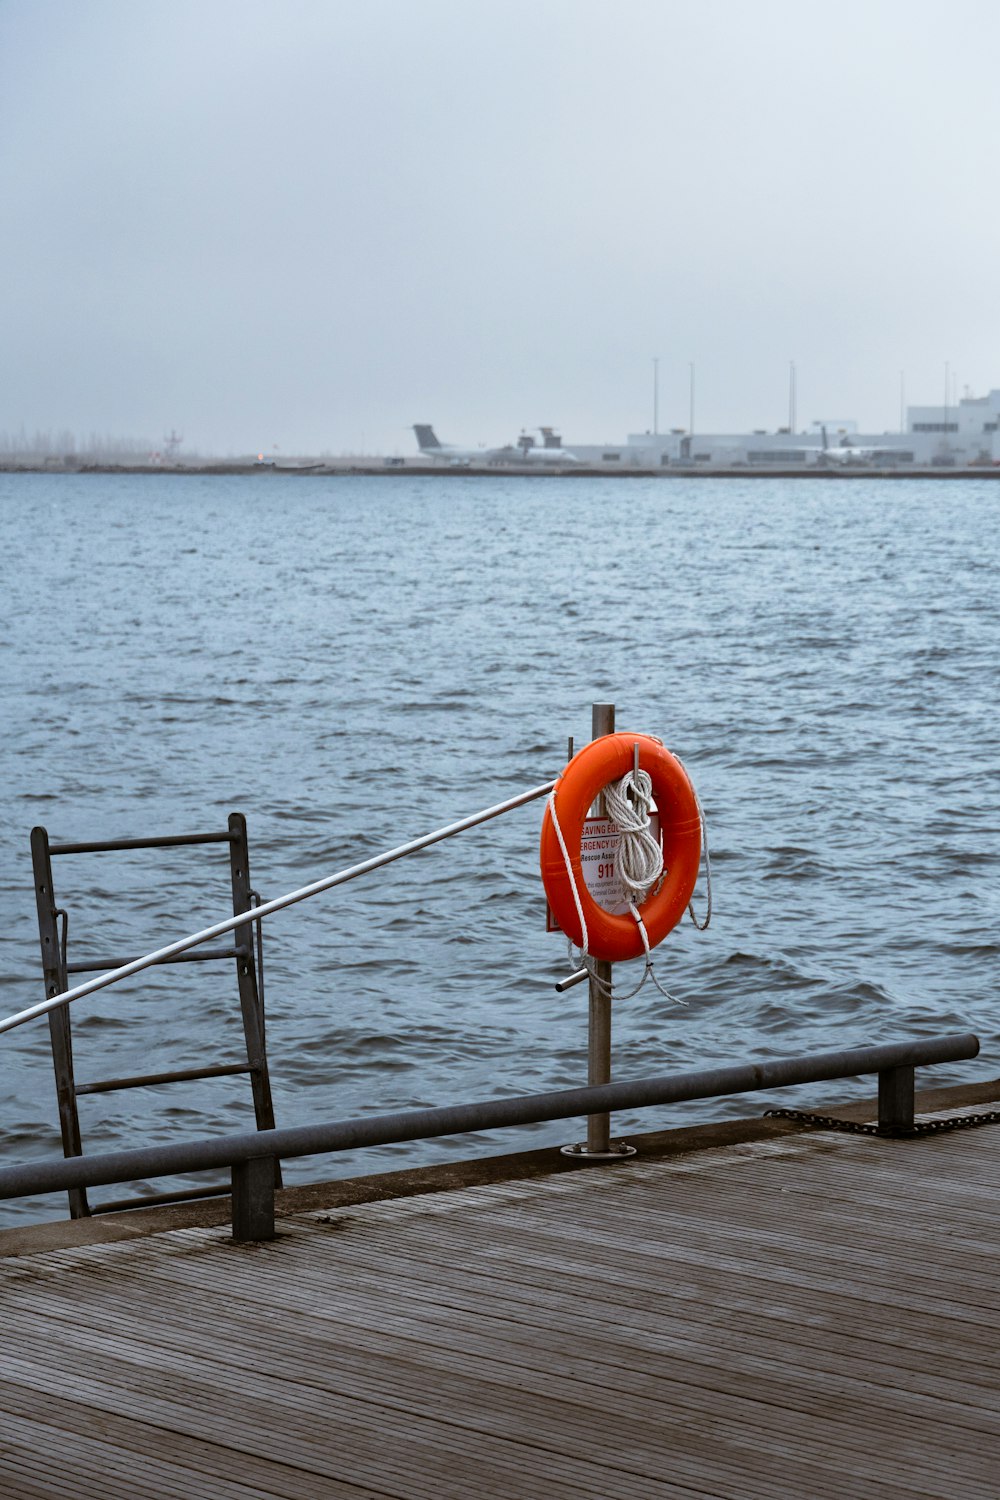 a life preserver on a wooden dock near the water